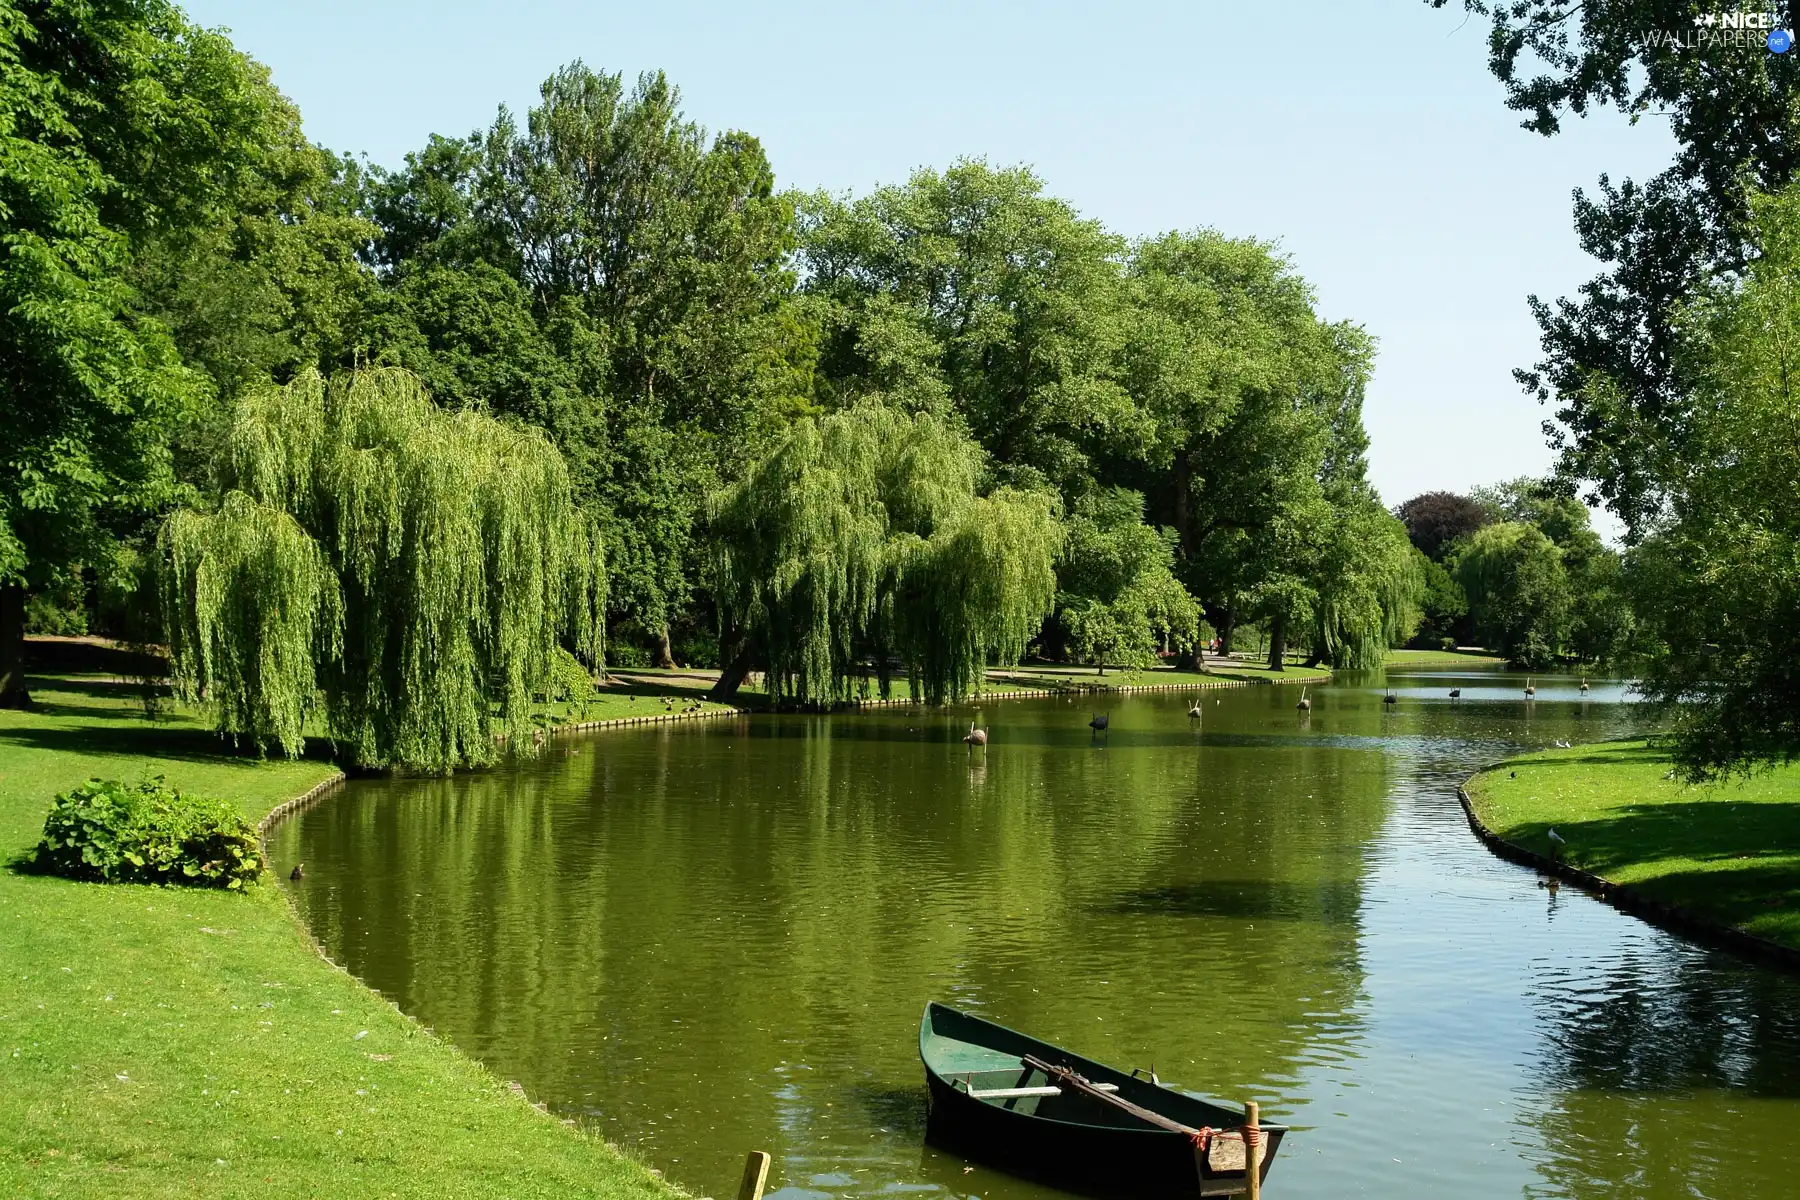 willow, Boat, trees, viewes, River